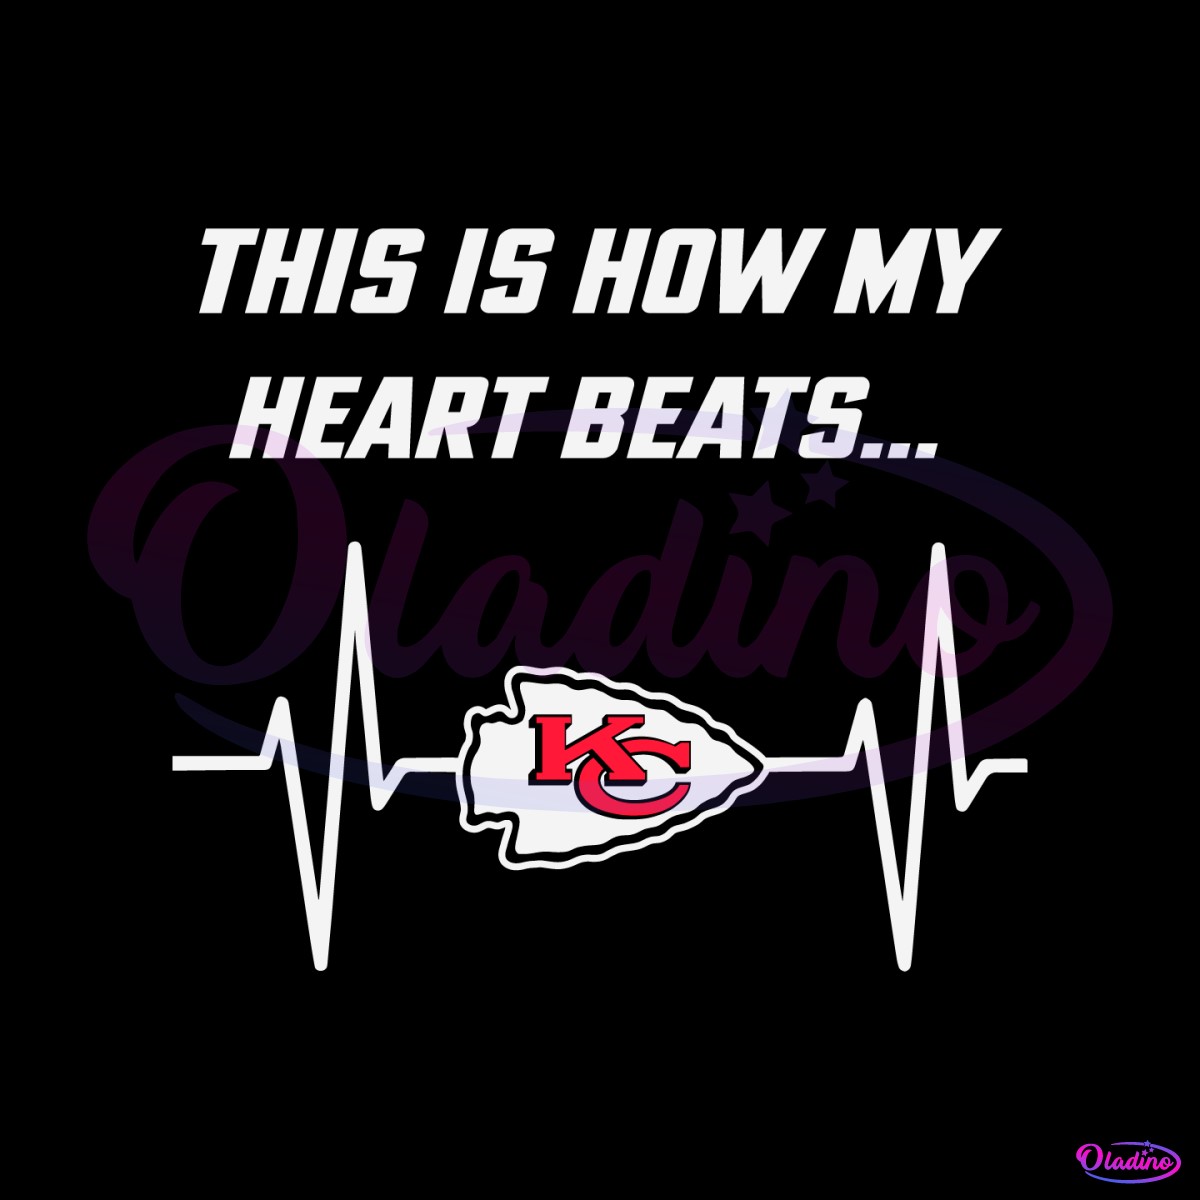 this-is-how-my-heart-beats-kansas-city-chiefs-svg